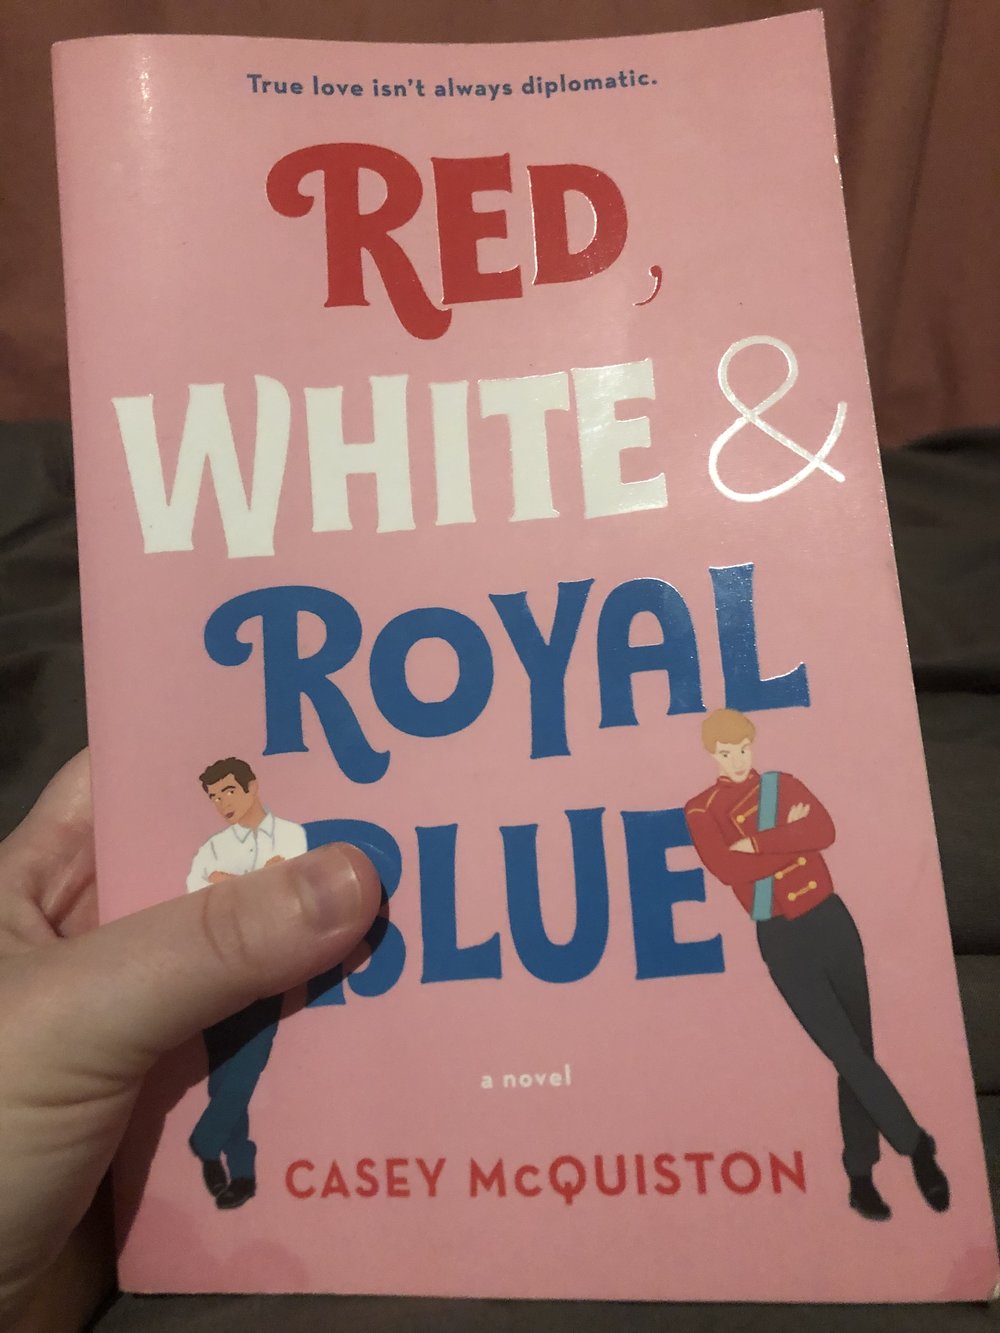 Blue and red white royal